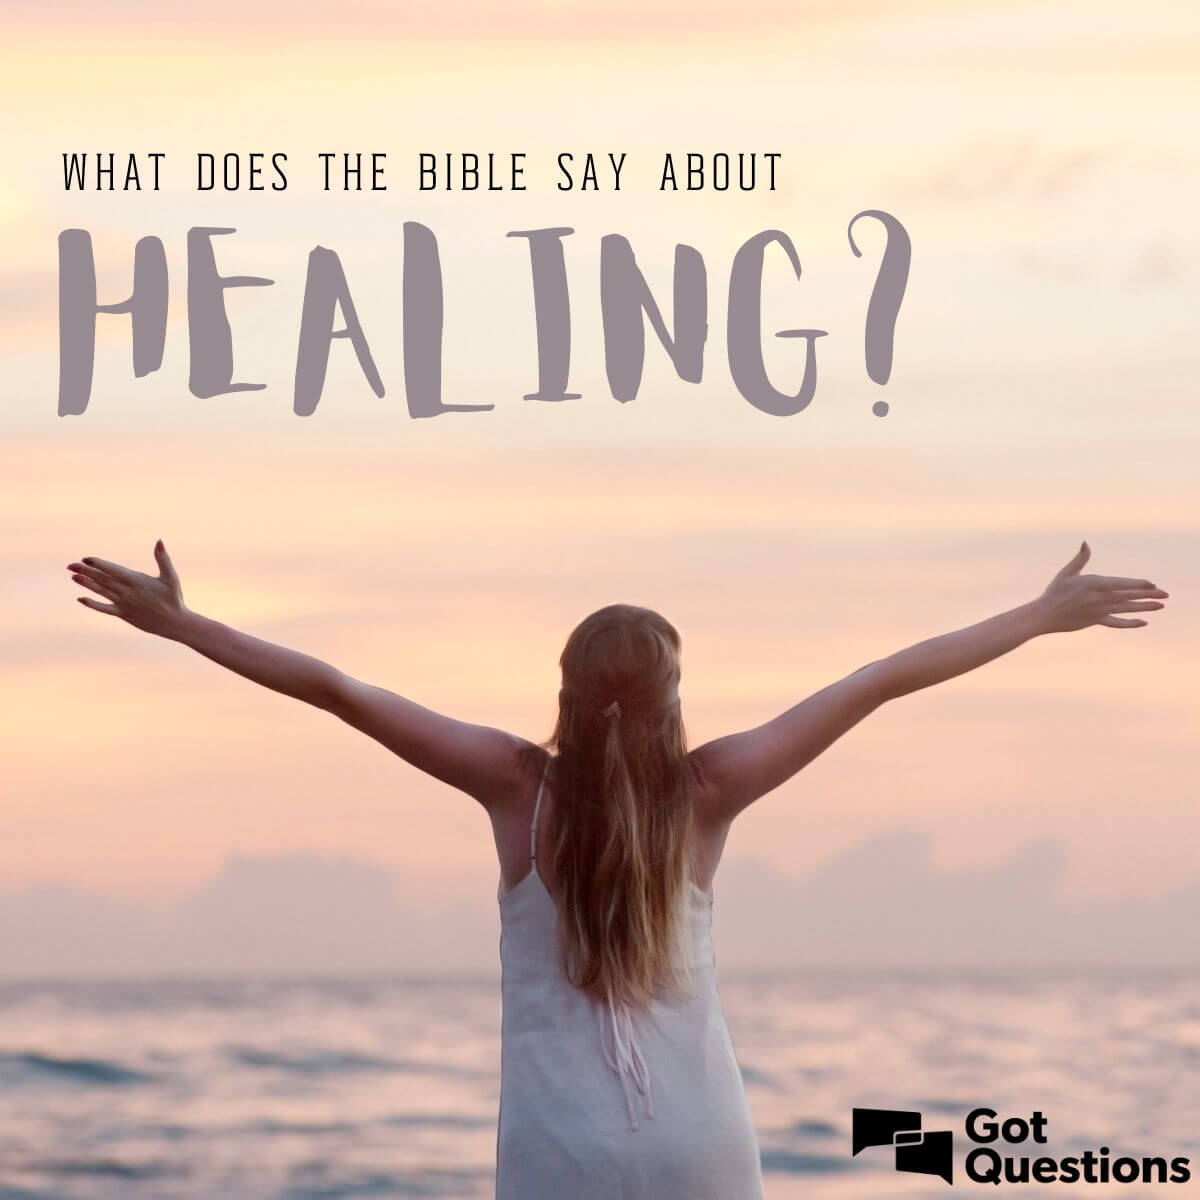 what-does-the-bible-say-about-healing-gotquestions